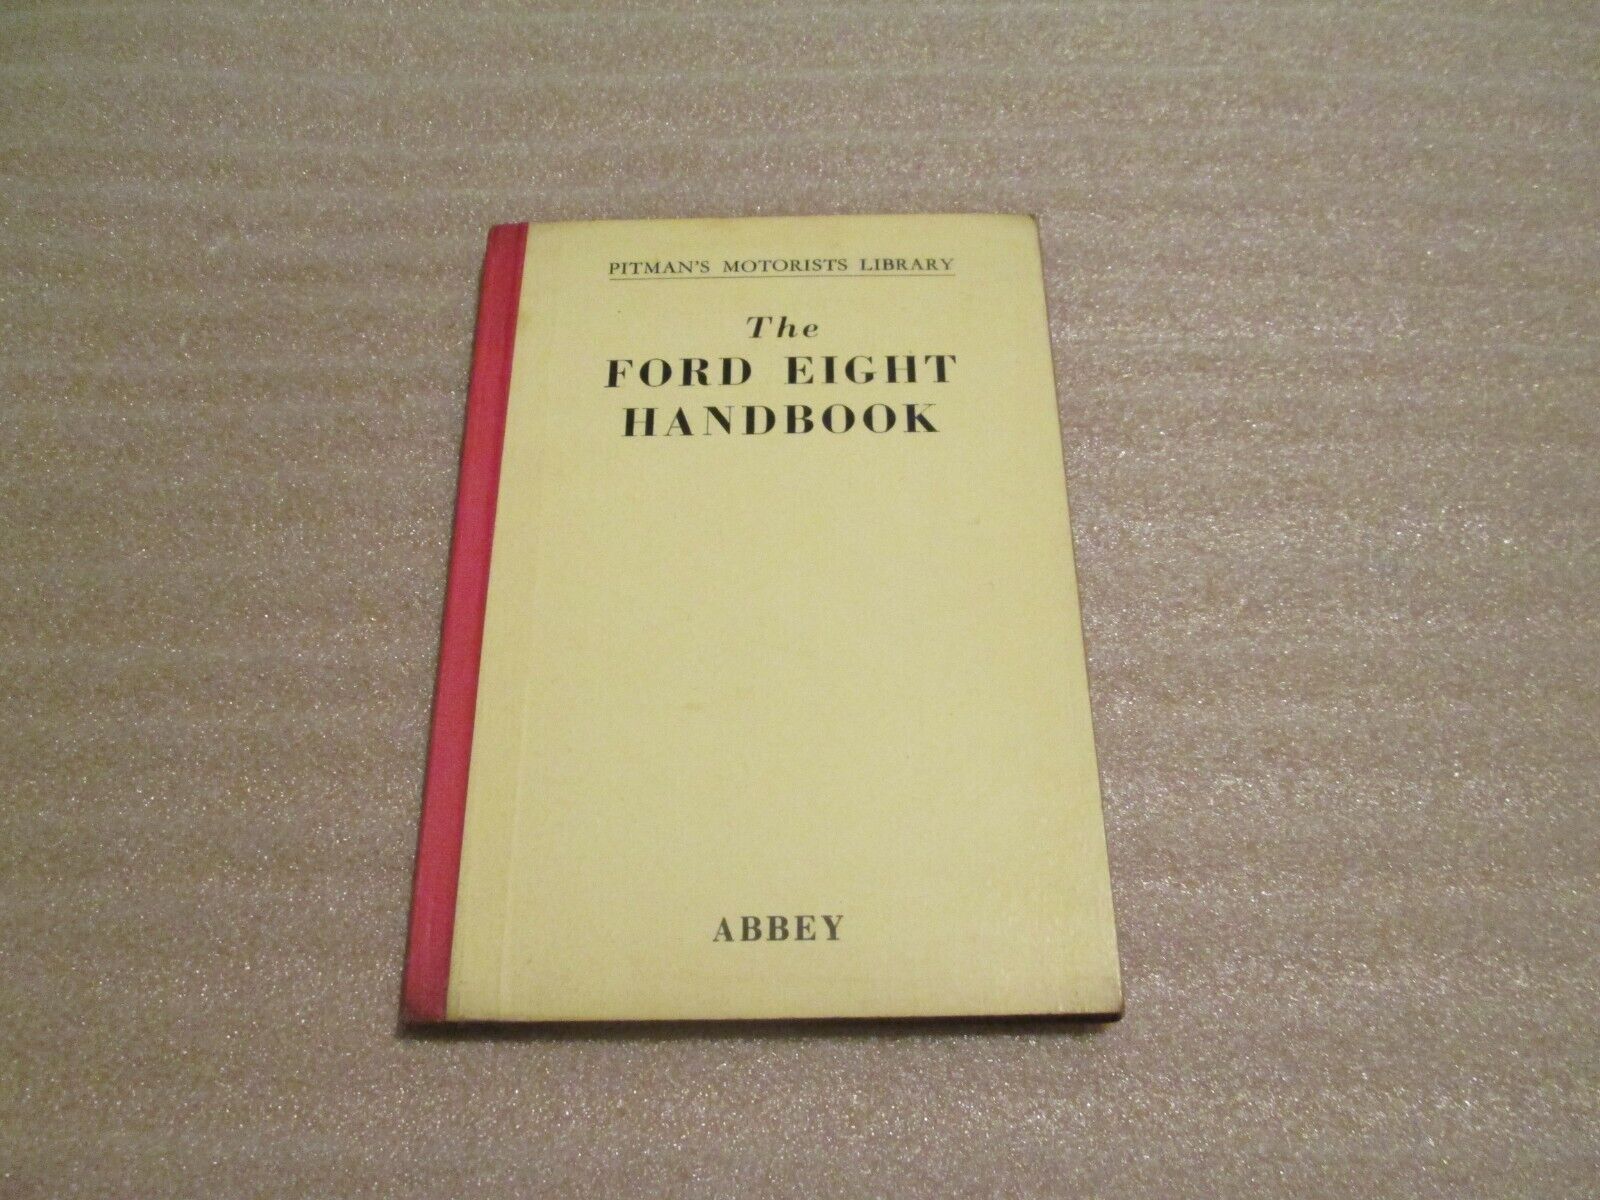 THE FORD EIGHT HANDBOOK OWNERS MANUAL DE LUX ANGLIA